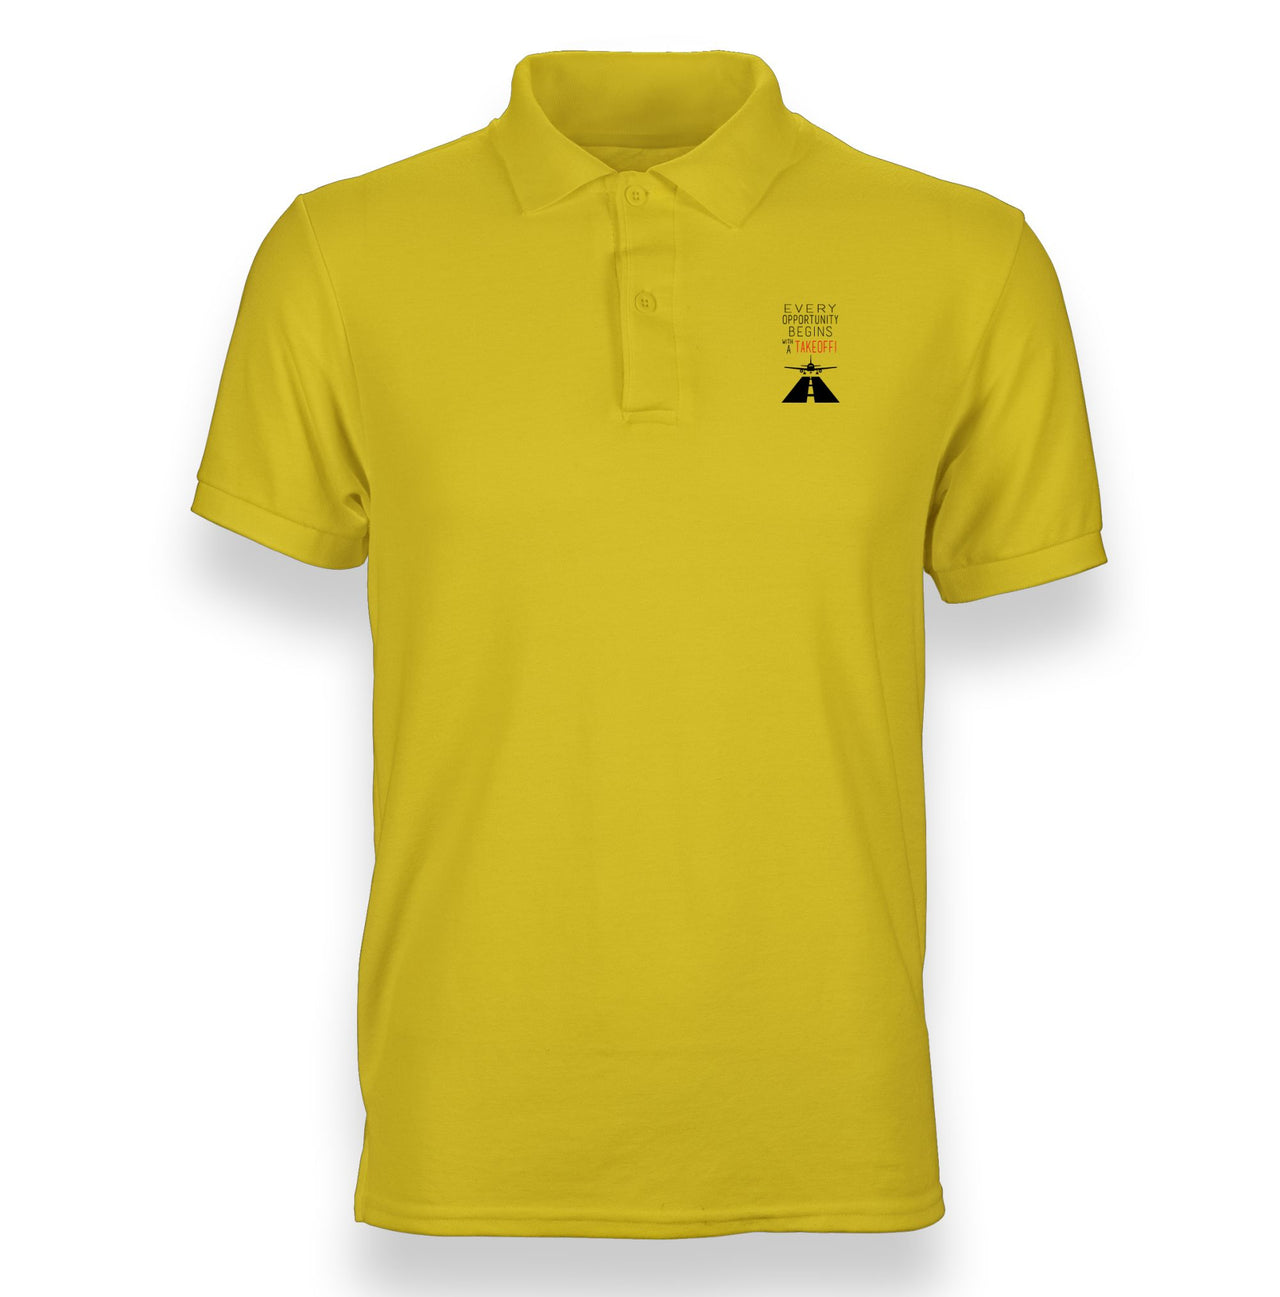 Every Opportunity Designed "WOMEN" Polo T-Shirts